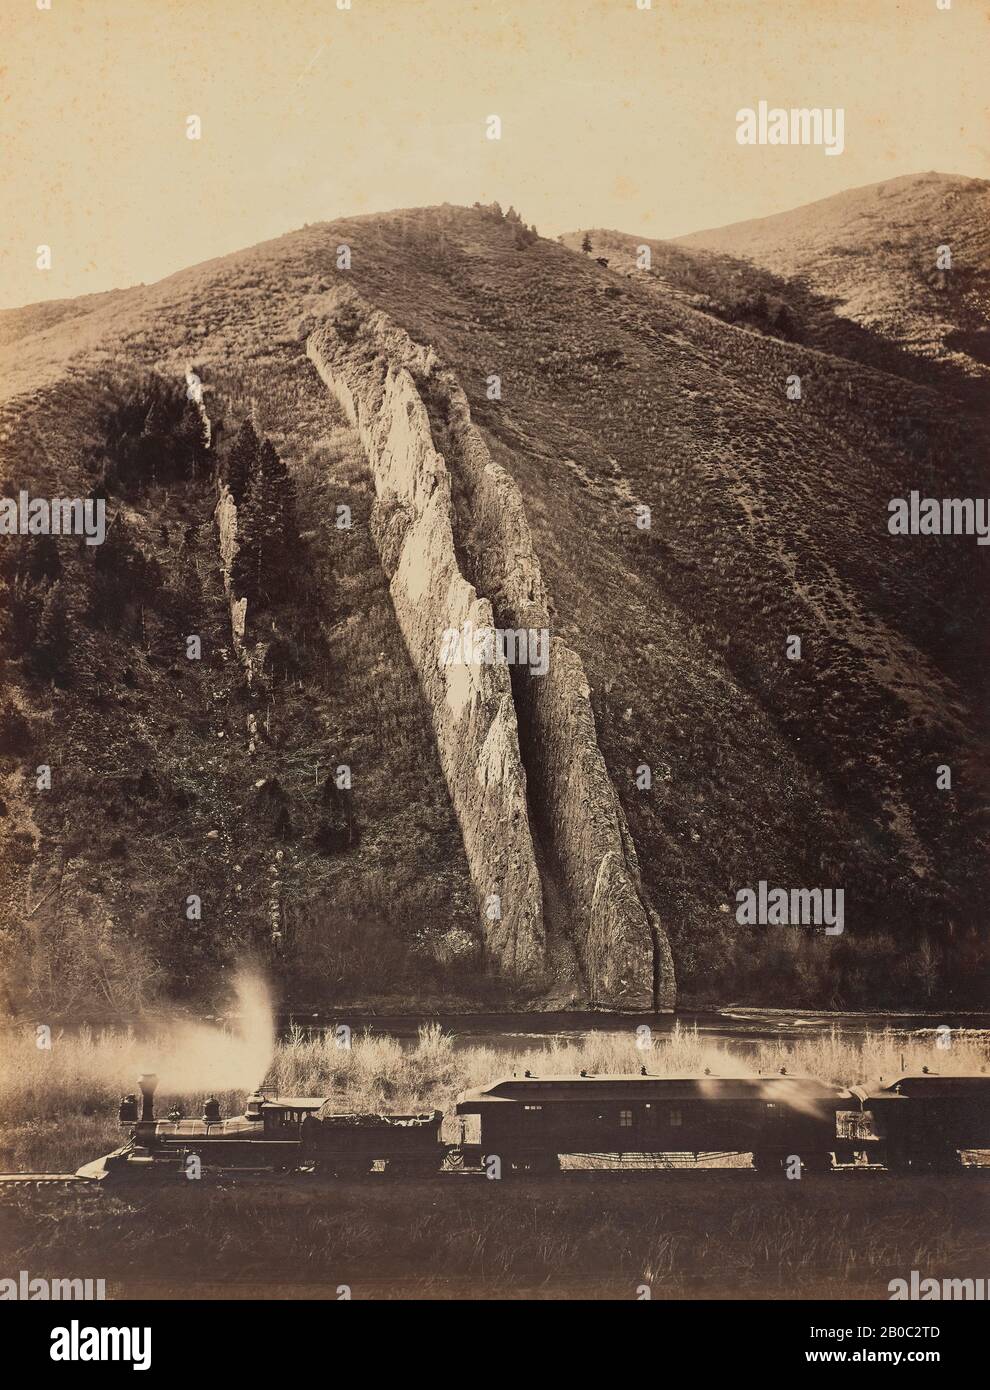 Carleton Emmons Watkins, Devil's Slide Utah, U.P.R.R., 1873-1874, albumen print, 20 9/16 in. x 15 13/16 in. (52.3 cm. x 40.1 cm.), The late-nineteenth century West was the age of the railroad and photography. Carleton Watkins combines both in this iconic picture. Drawn west in 1851 by the Gold Rush, he stayed in California, where his scenic photographs helped to build support for Yosemite National Park. Yet Watkins also supported himself by photographing for mining and railway companies. Devil's Slide Utah, U.P.R.R. captures the ambiguities of Watkins's dual roles. Two parallel but off-kilter Stock Photo